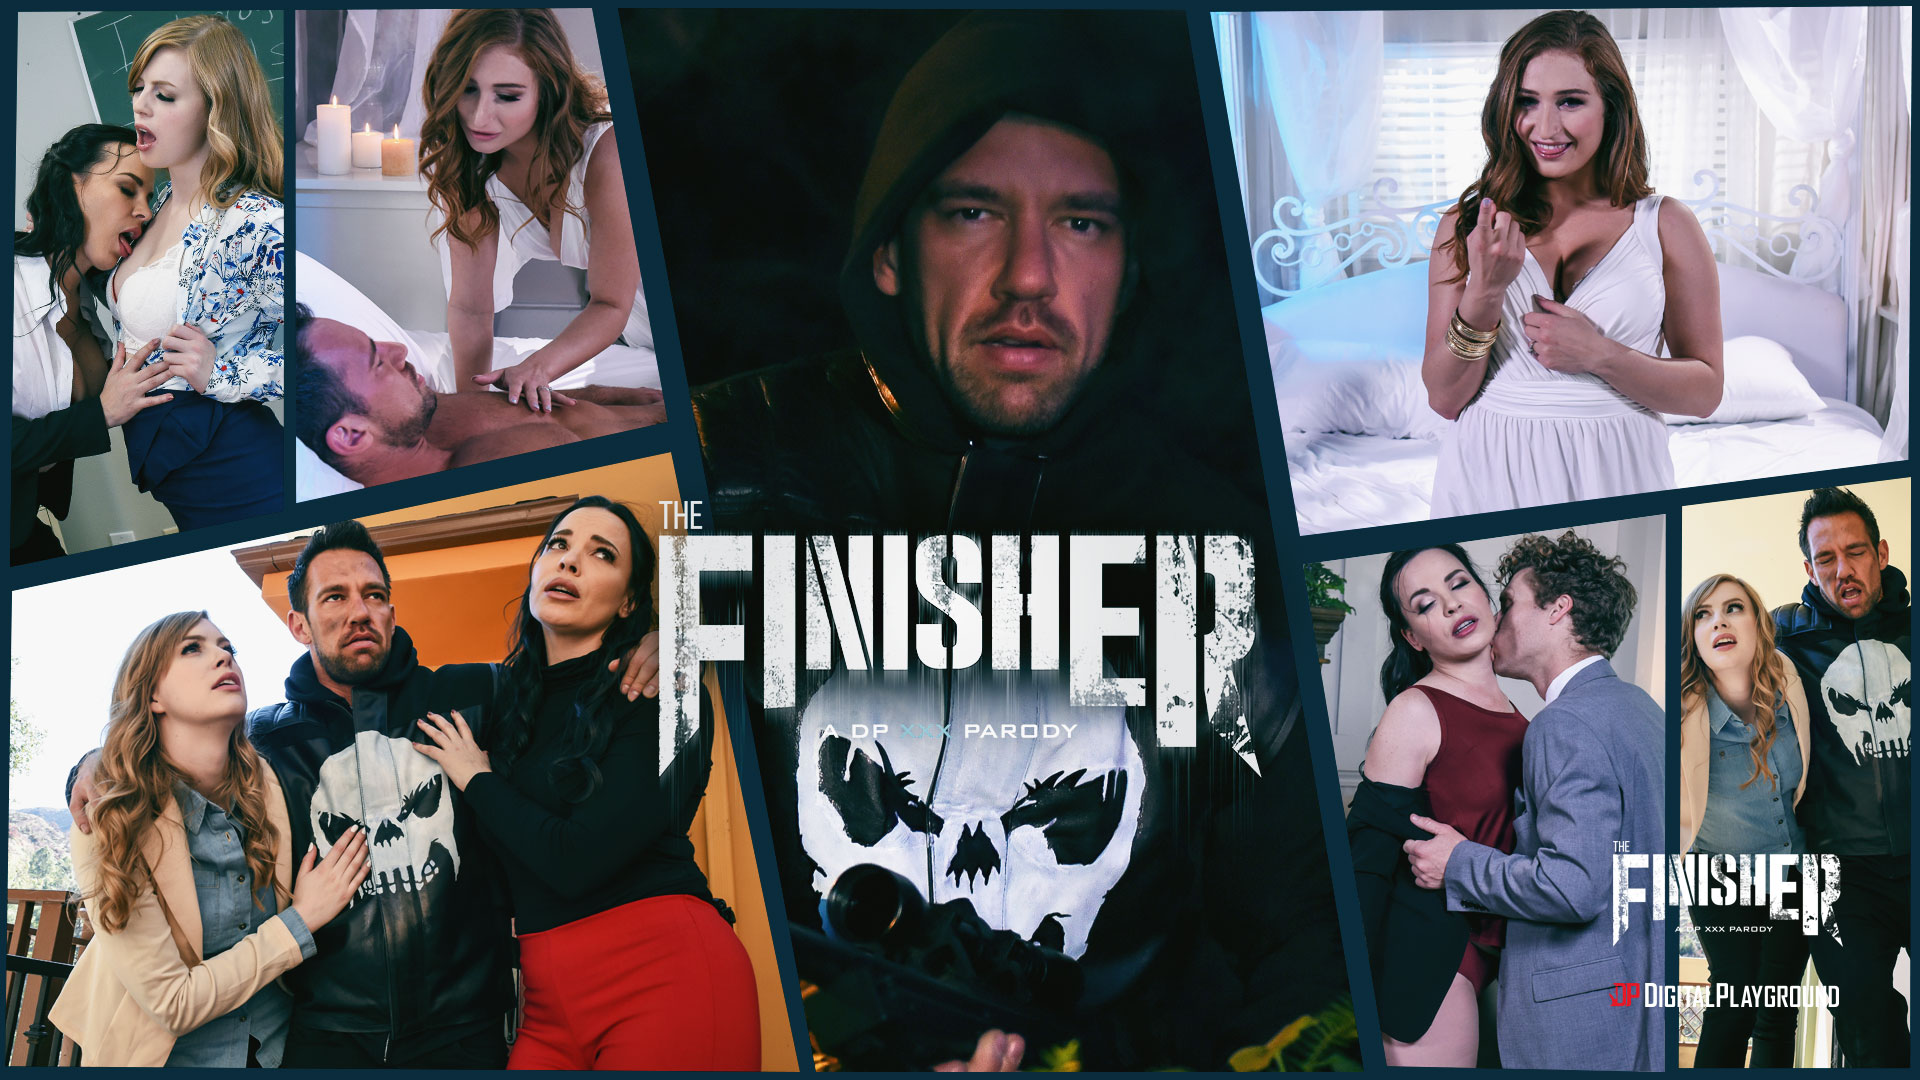 Dp Xxx Porn Movies - Digital Playground Settles Old Scores in Latest Parody 'The Finisher: A DP  XXX Parody' | RogReviews